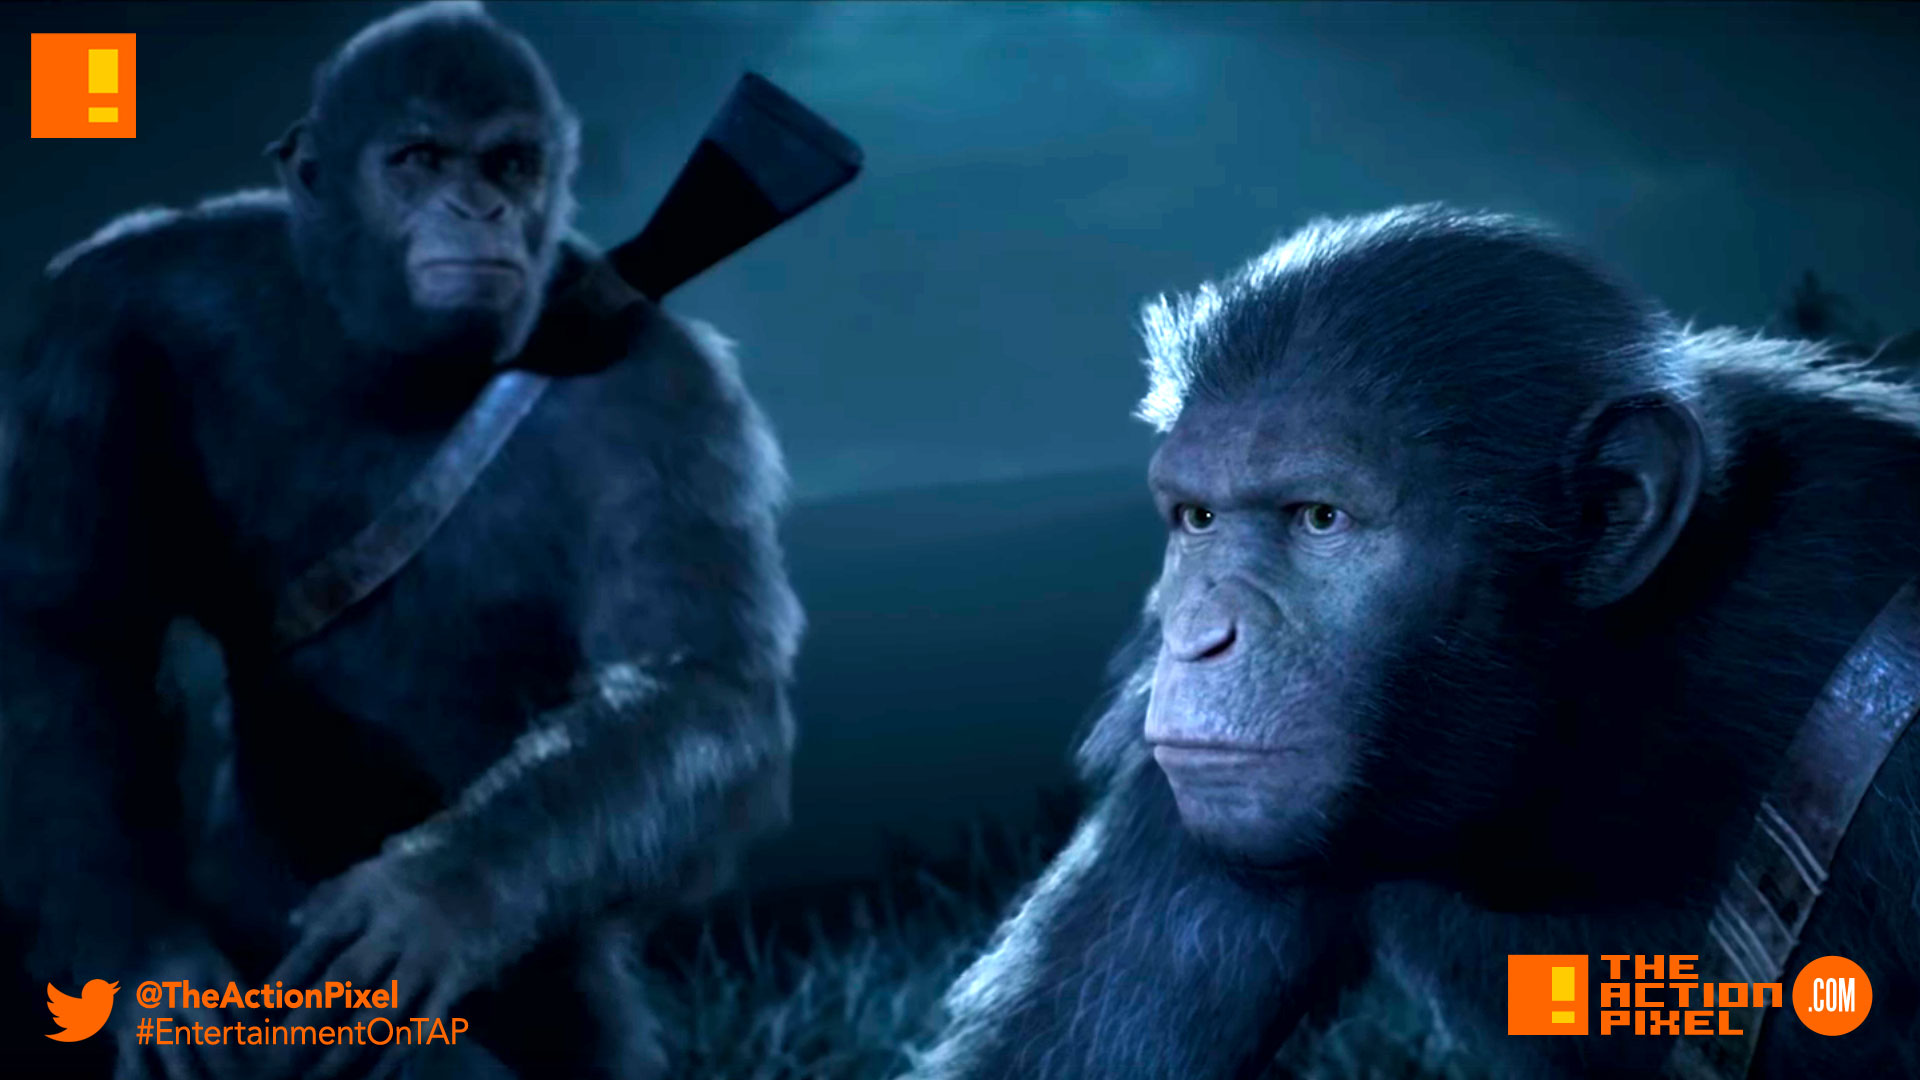 planet of the apes, last frontier, planet of the apes: last frontier, foxnext games, creative england, the imaginarium, the action pixel, trailer, entertainment on tap